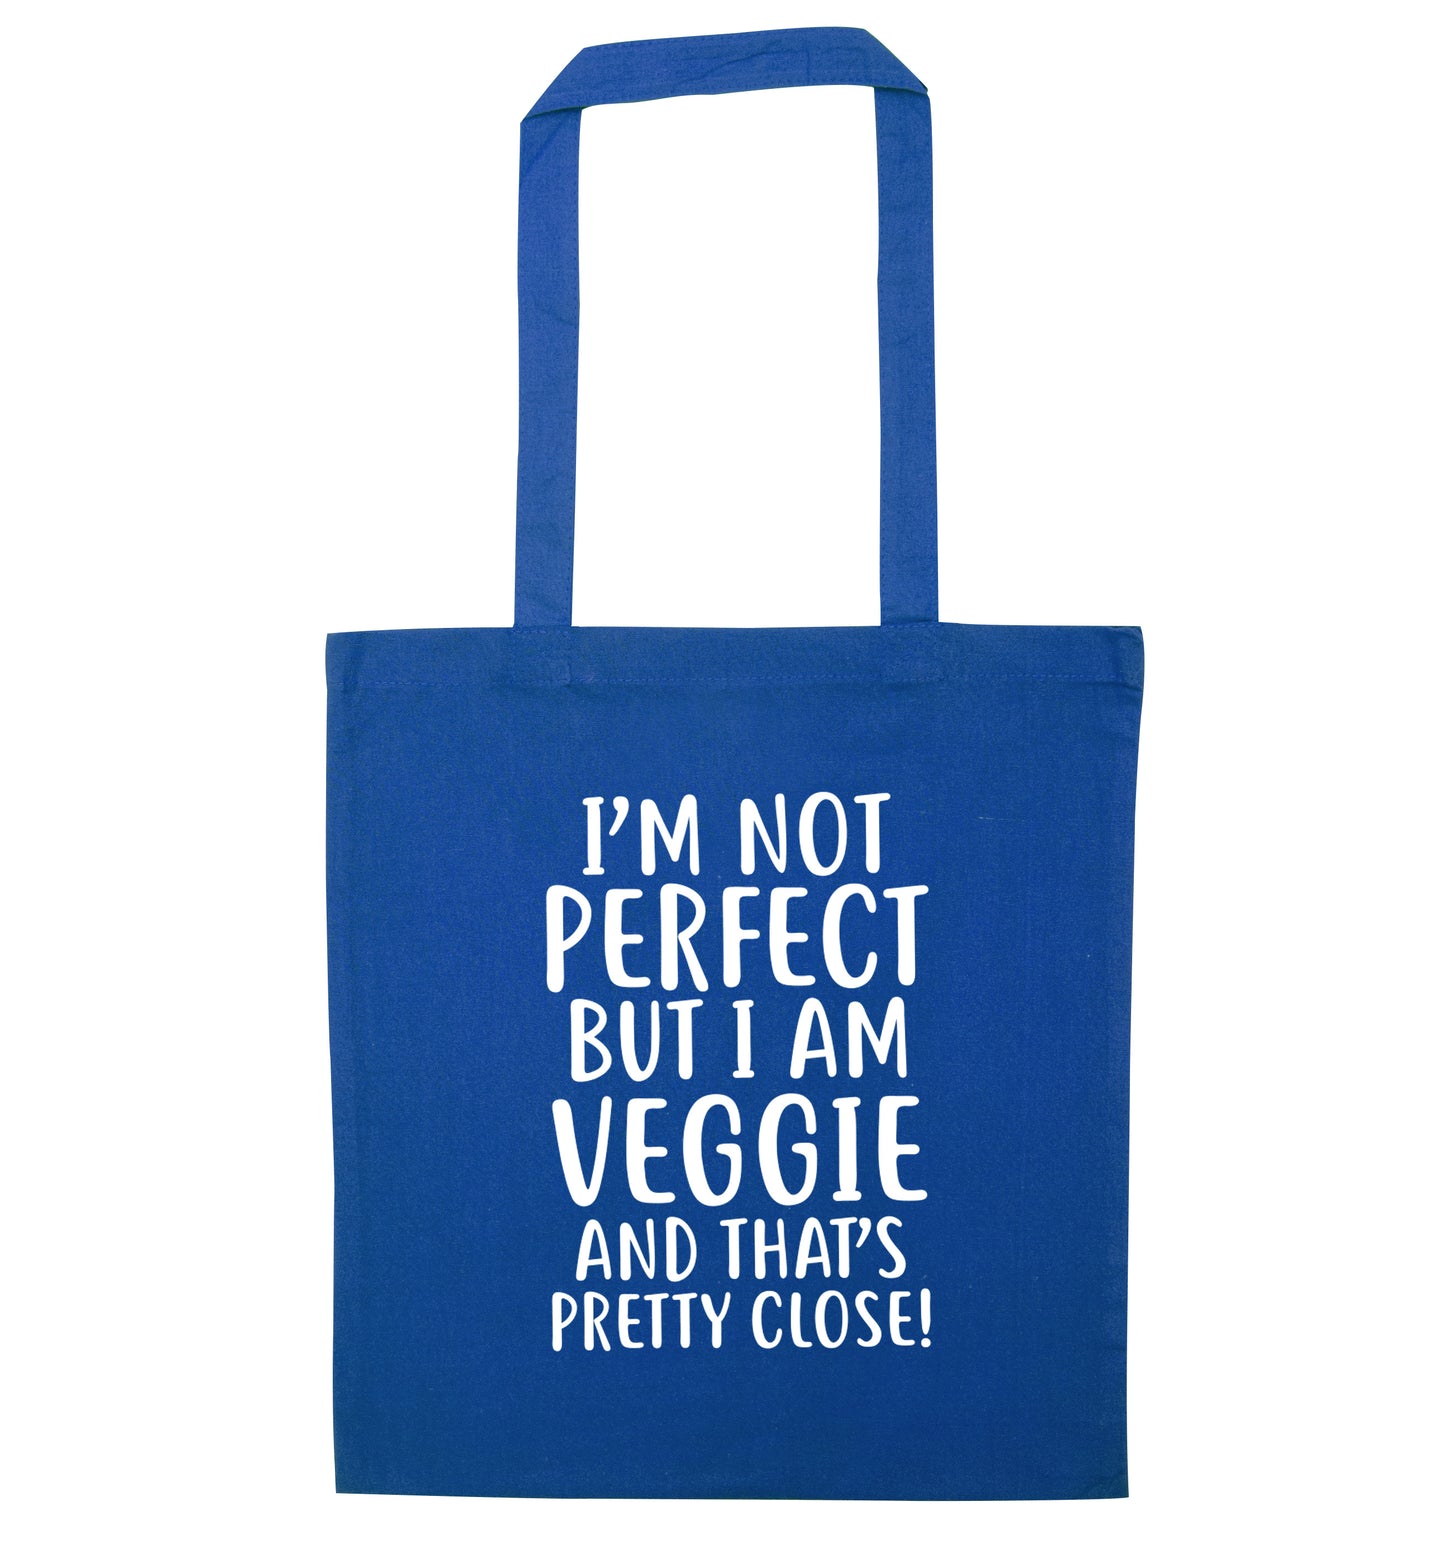 Might not be perfect but I am veggie blue tote bag